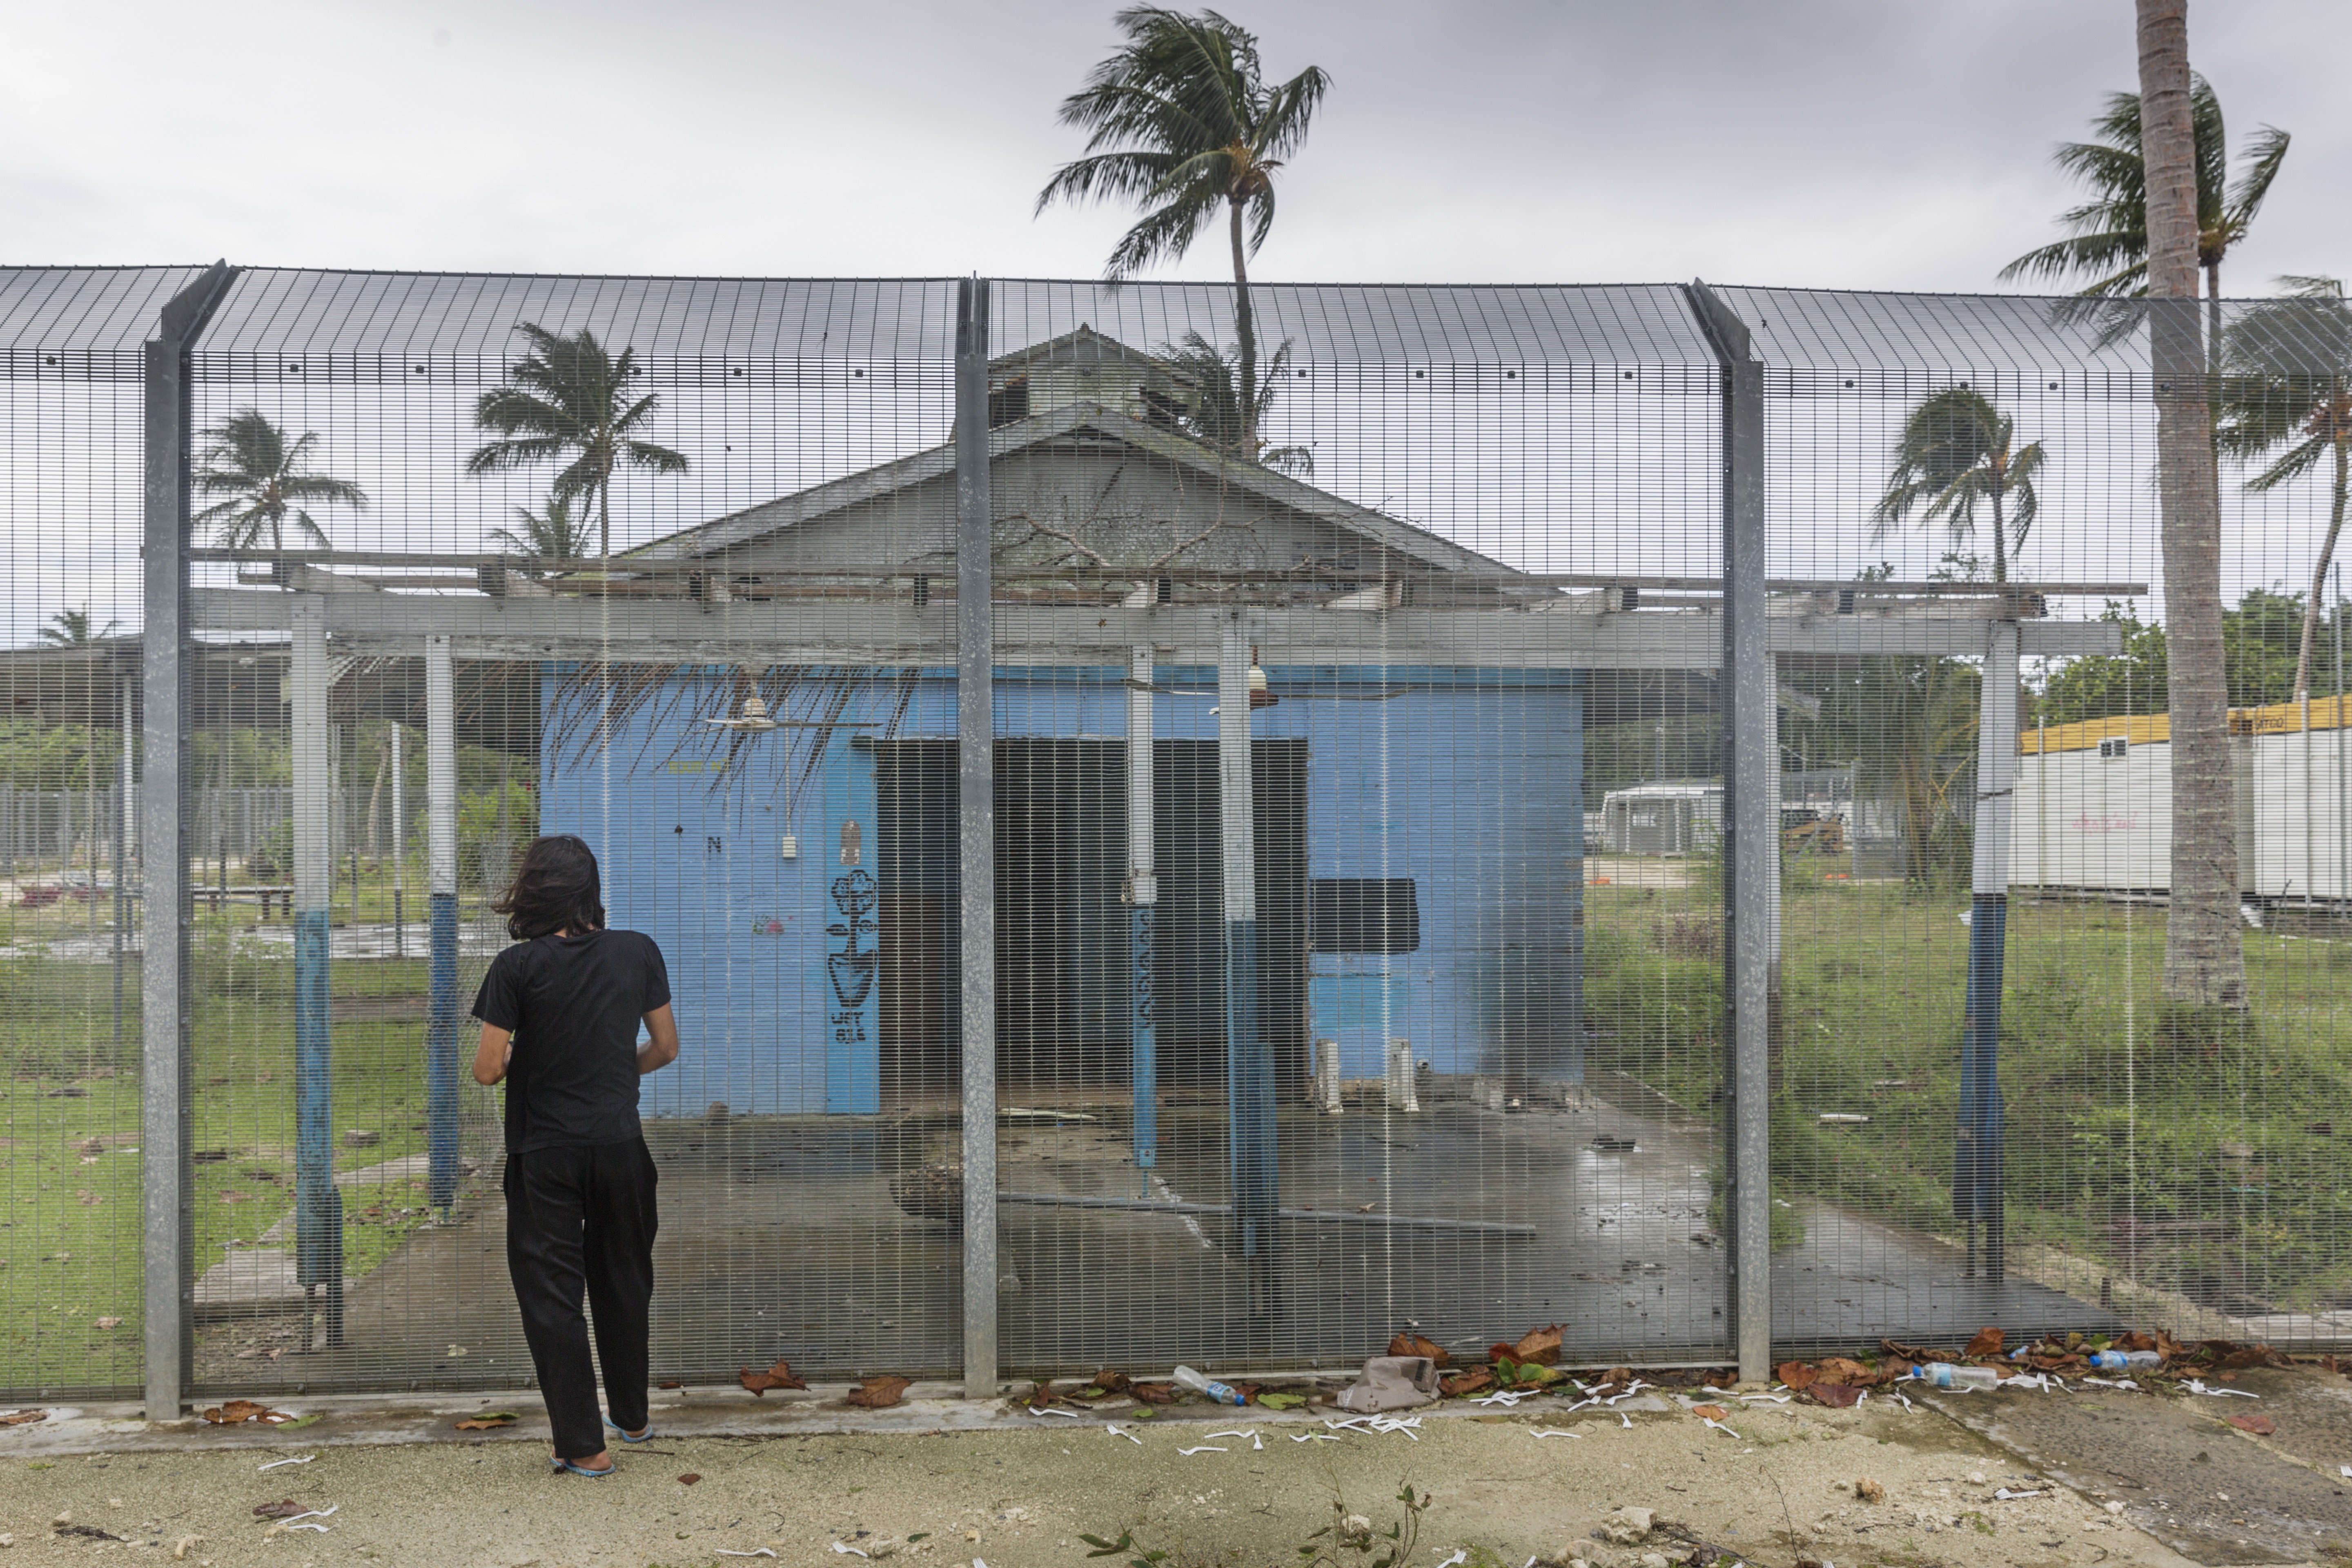 Boochani stands outside the detention centre where he was locked up for his first three years on Manus Island. Photo: Jonas Gratzer